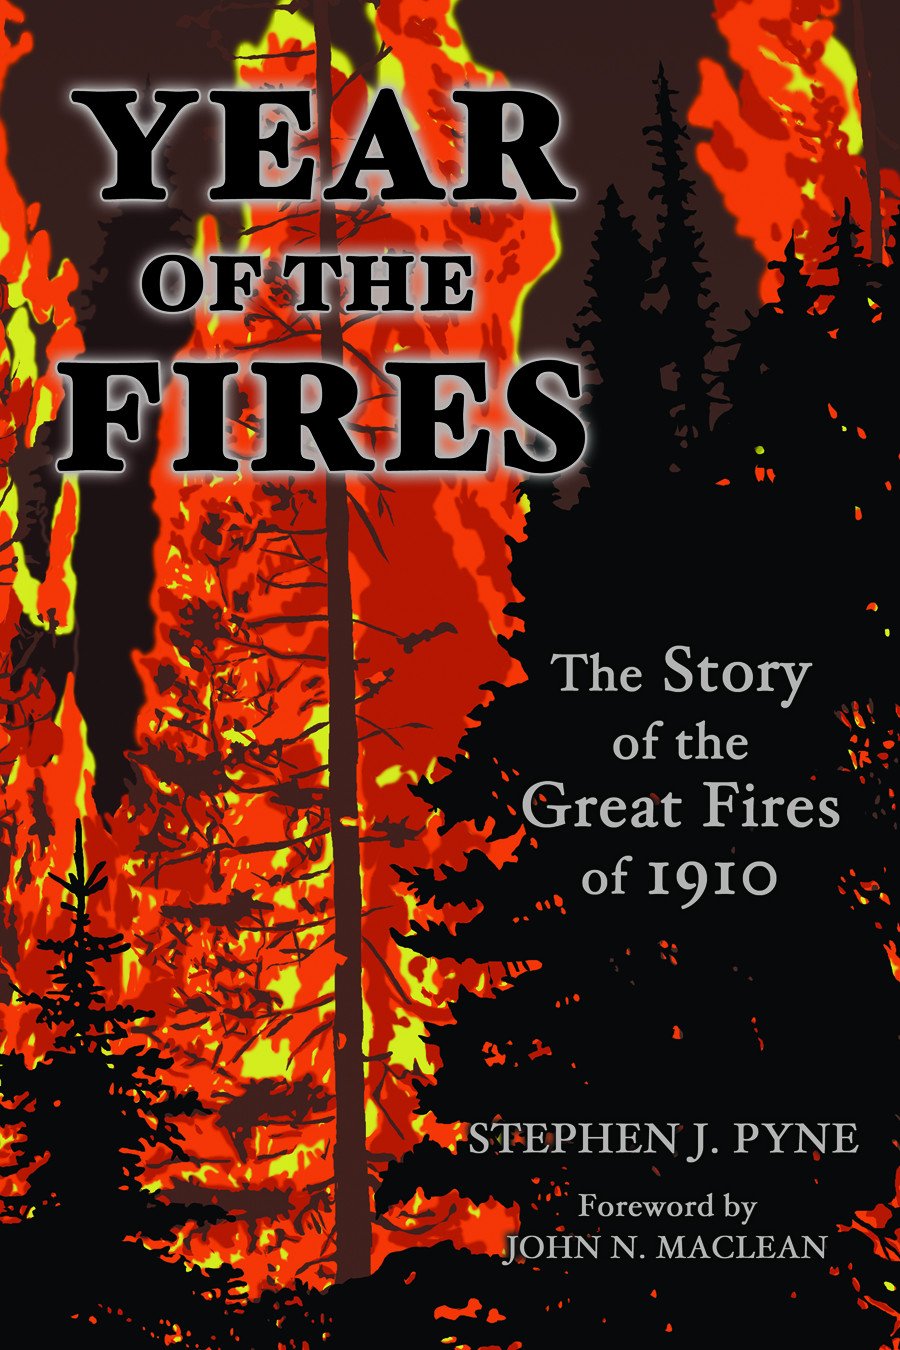 Year of the fires: The story of the great fires of 1910 (book cover)